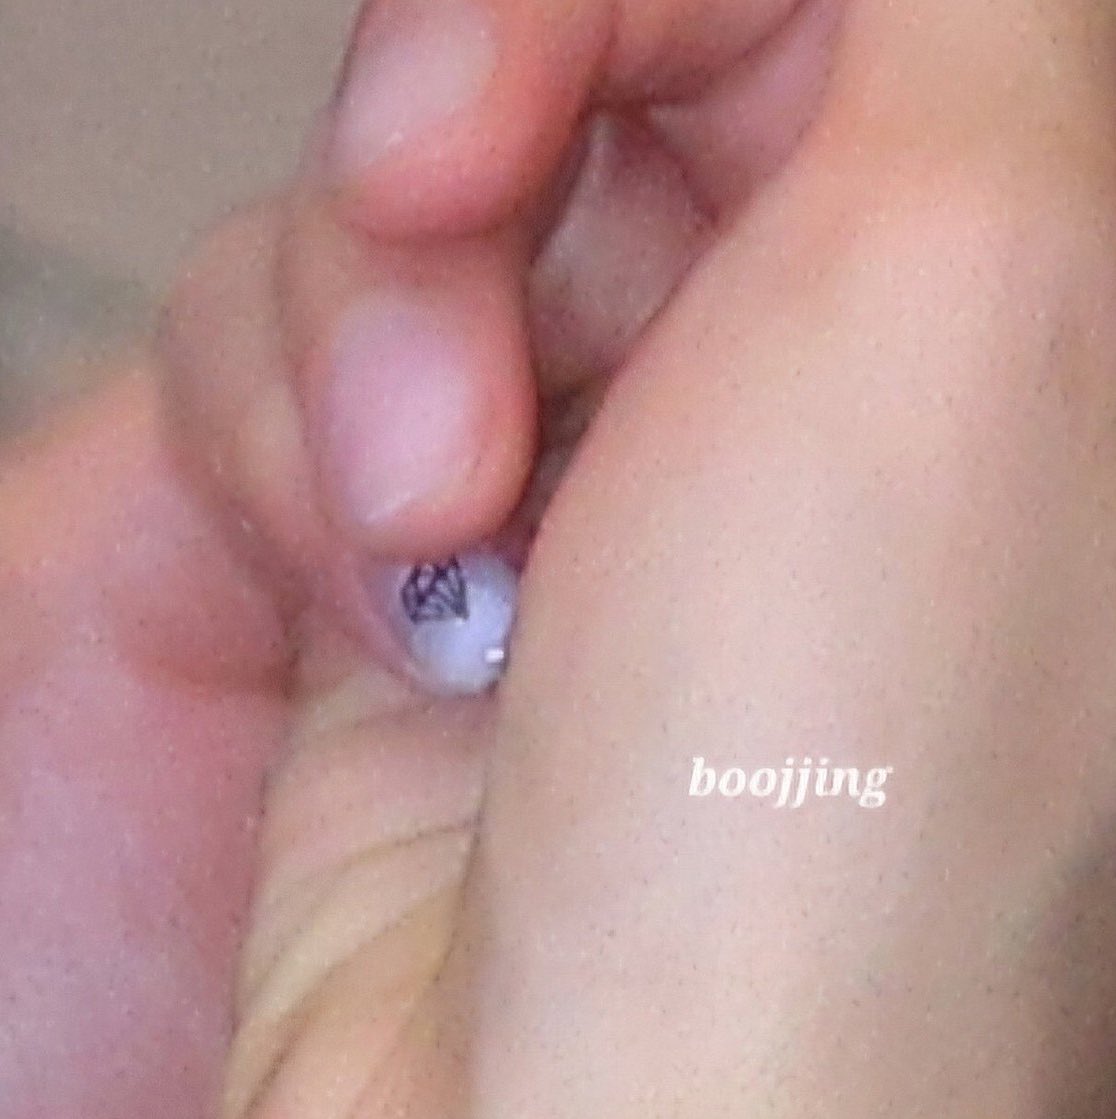 WAIT OMG seungkwan has a diamond nail art on his pinky ?? 😭😭😭😭 the fact that it's in the finger where his svt ring is in too... he loves his team he loves his crew 

cr boojjing